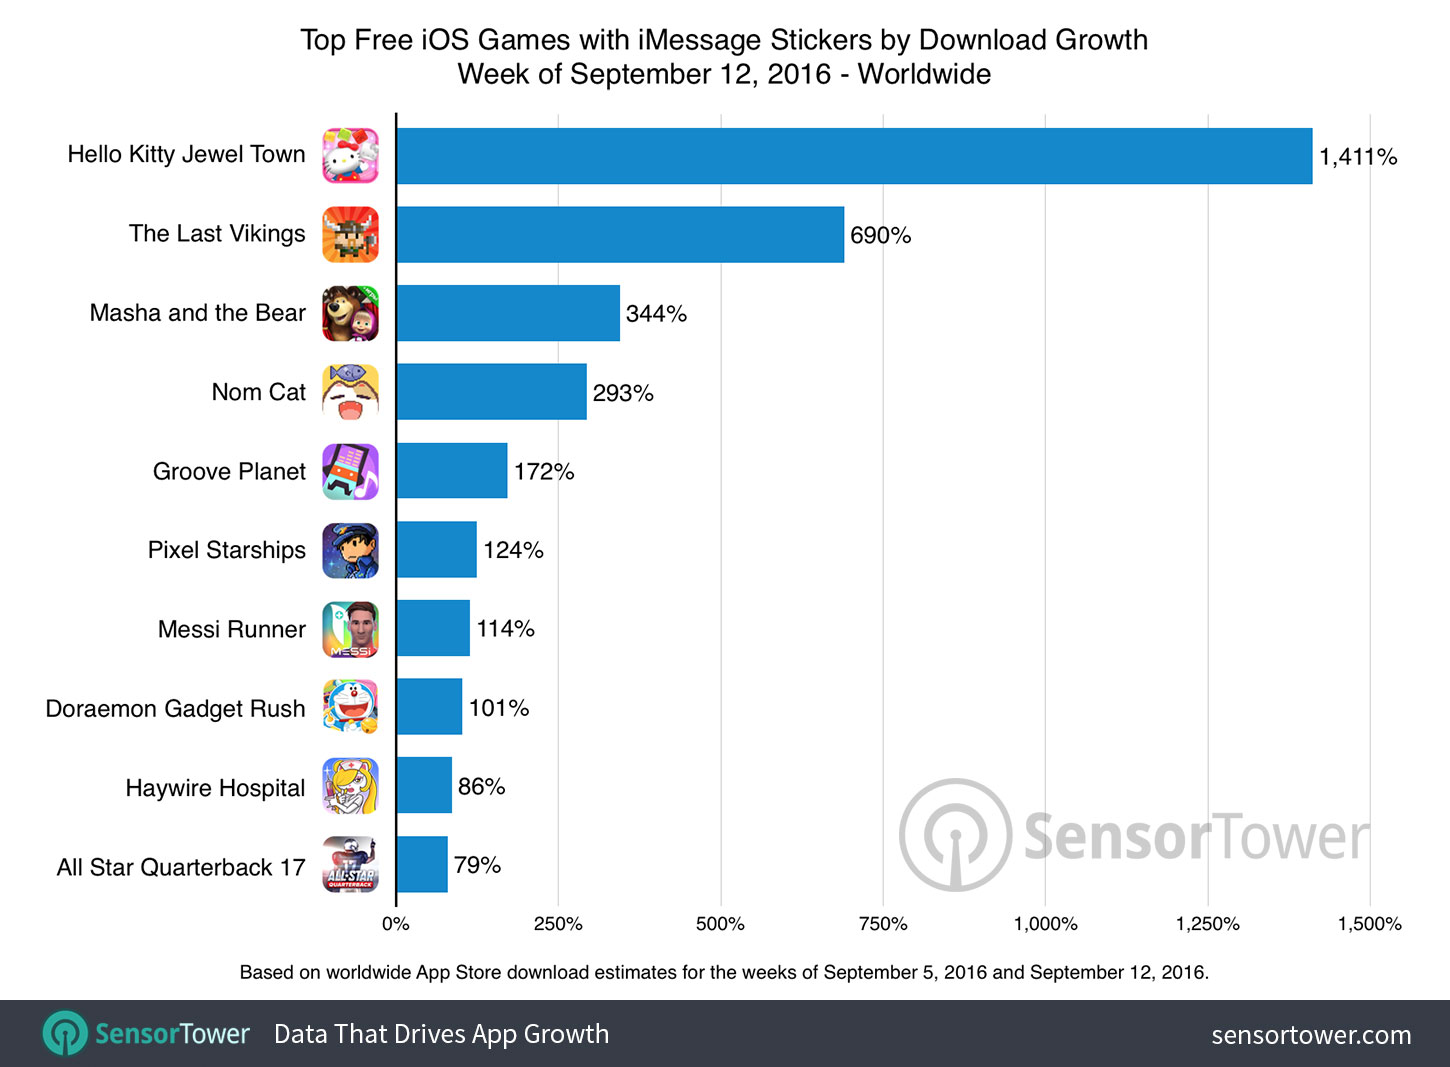 Top iOS Games with iMessage Stickers by Download Growth